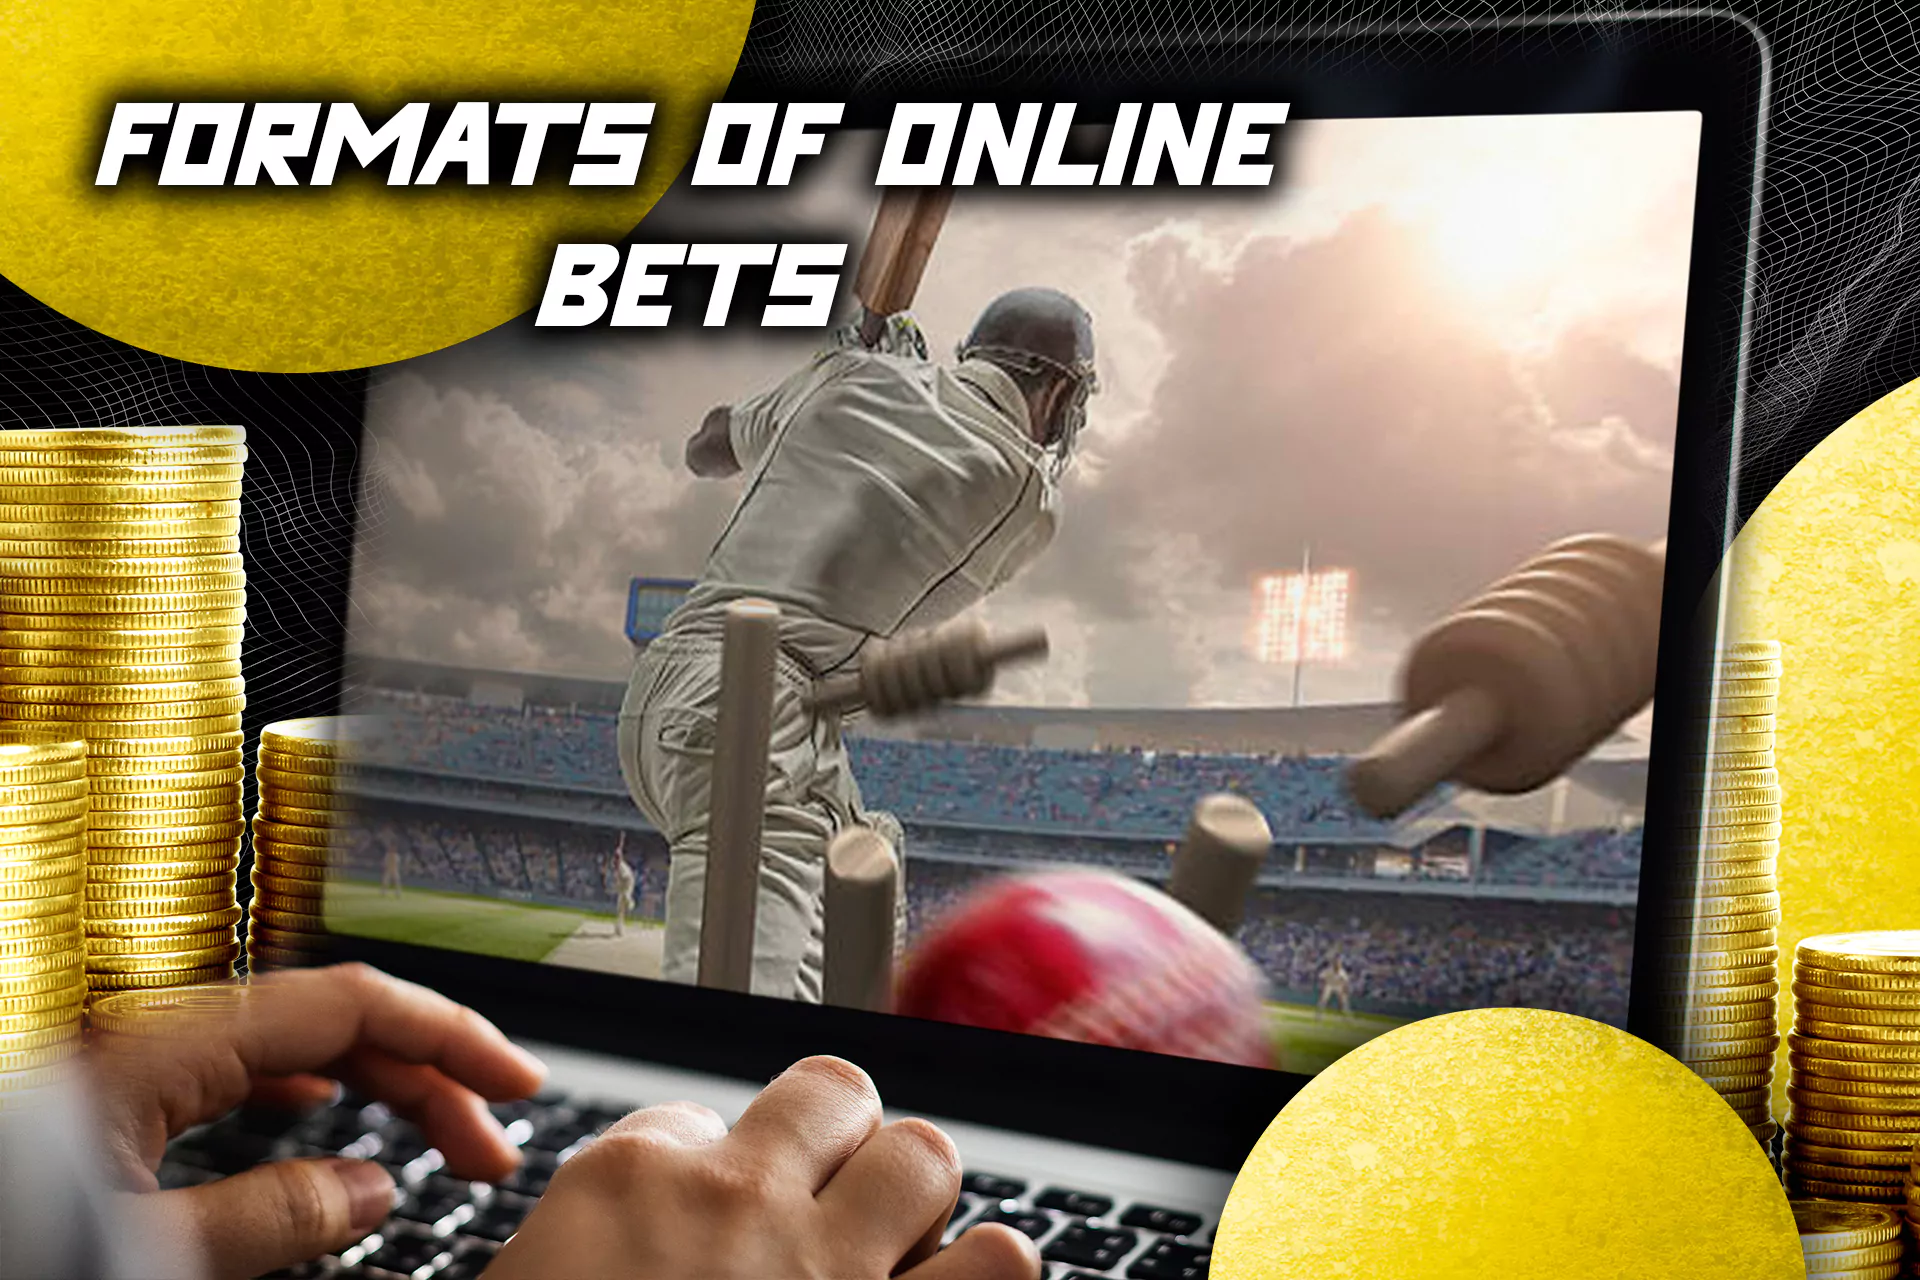 Here are the betting formats you can count on when betting on cricket online.